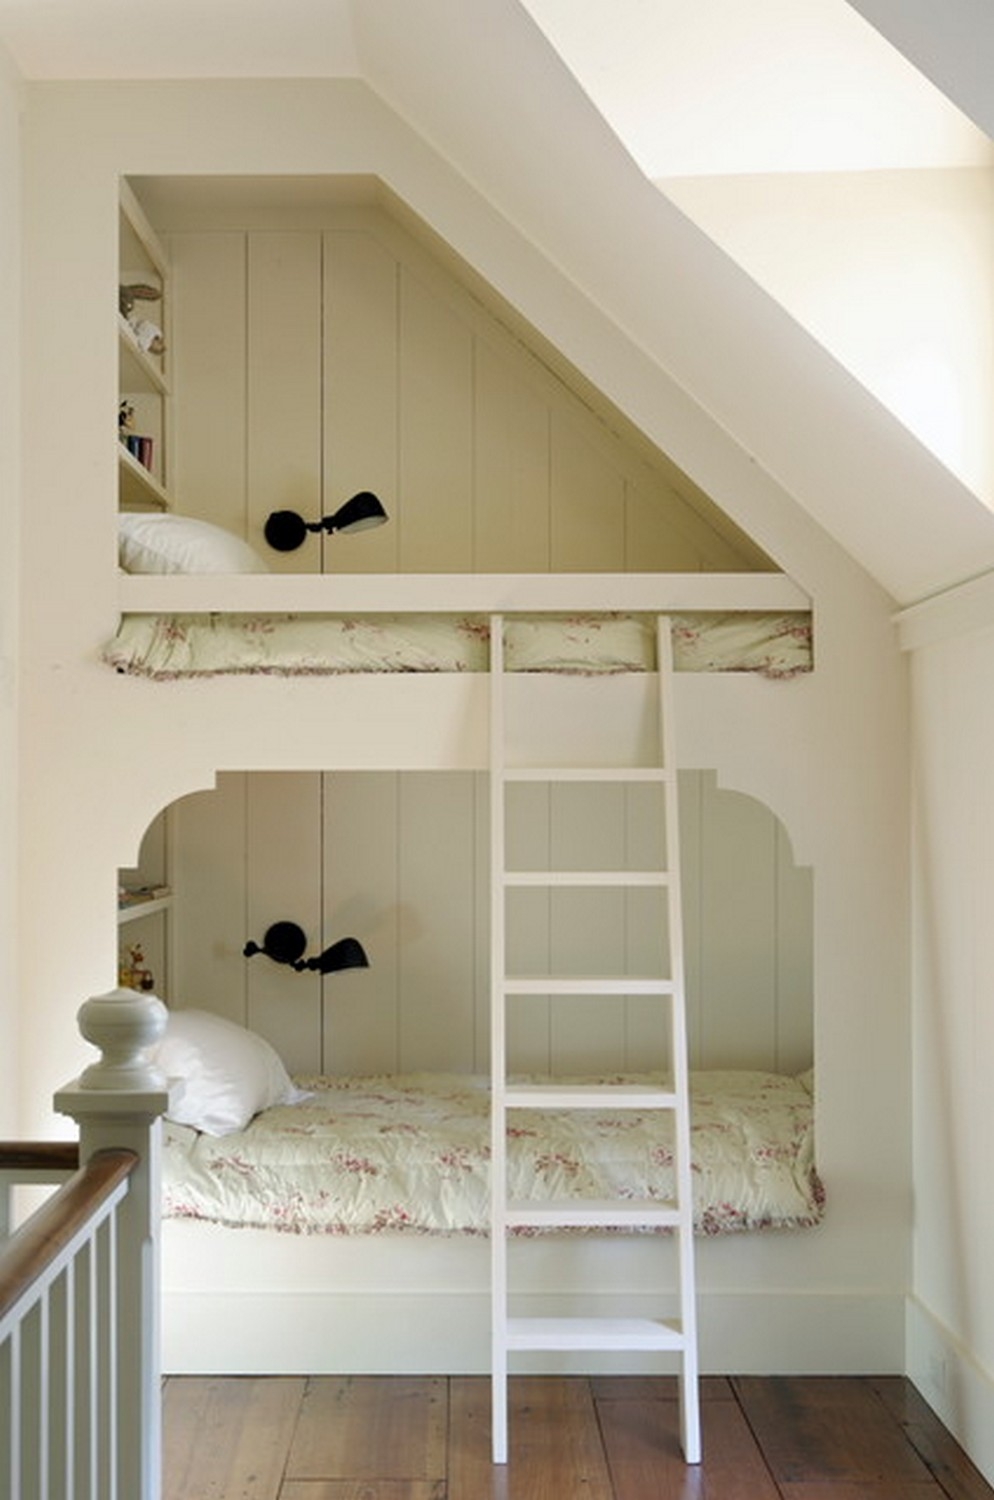 Bunk beds with shelves